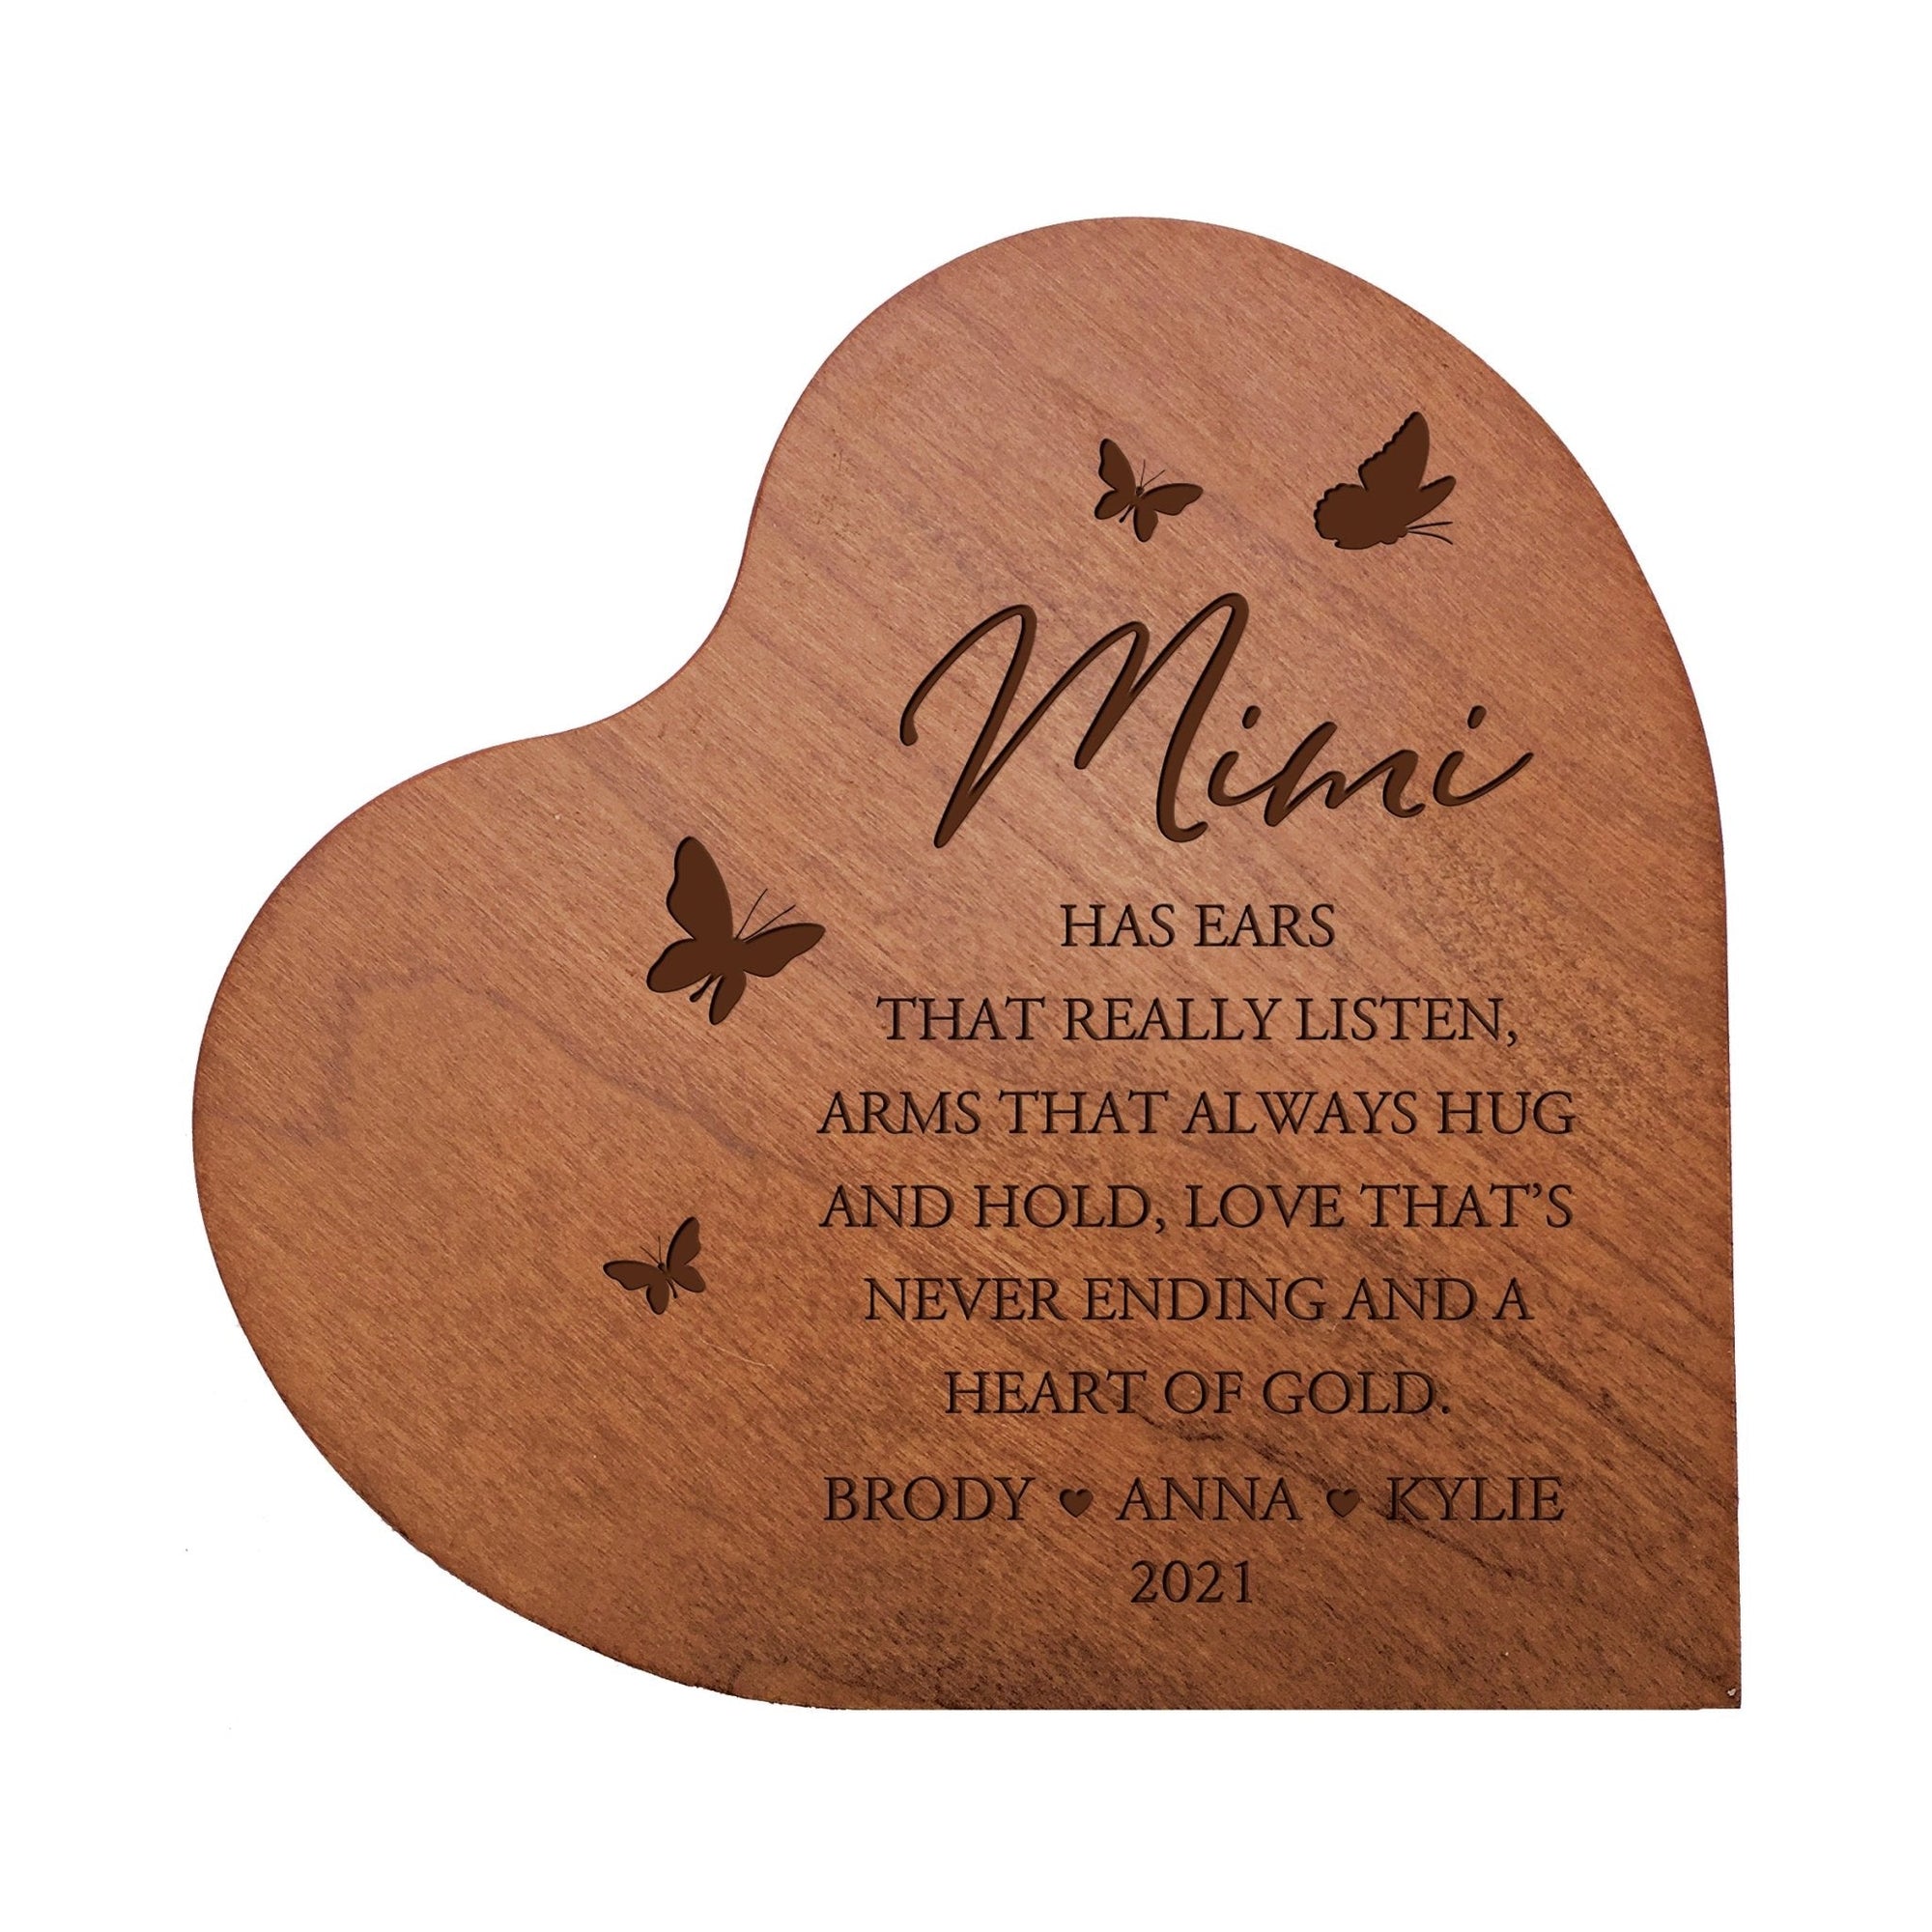 Personalized Modern Mimi’s Love Solid Wood Heart Decoration With Inspirational Verse Keepsake Gift 5x5.25 - Mimi Has Ears That Really = Heart Of Gold - LifeSong Milestones